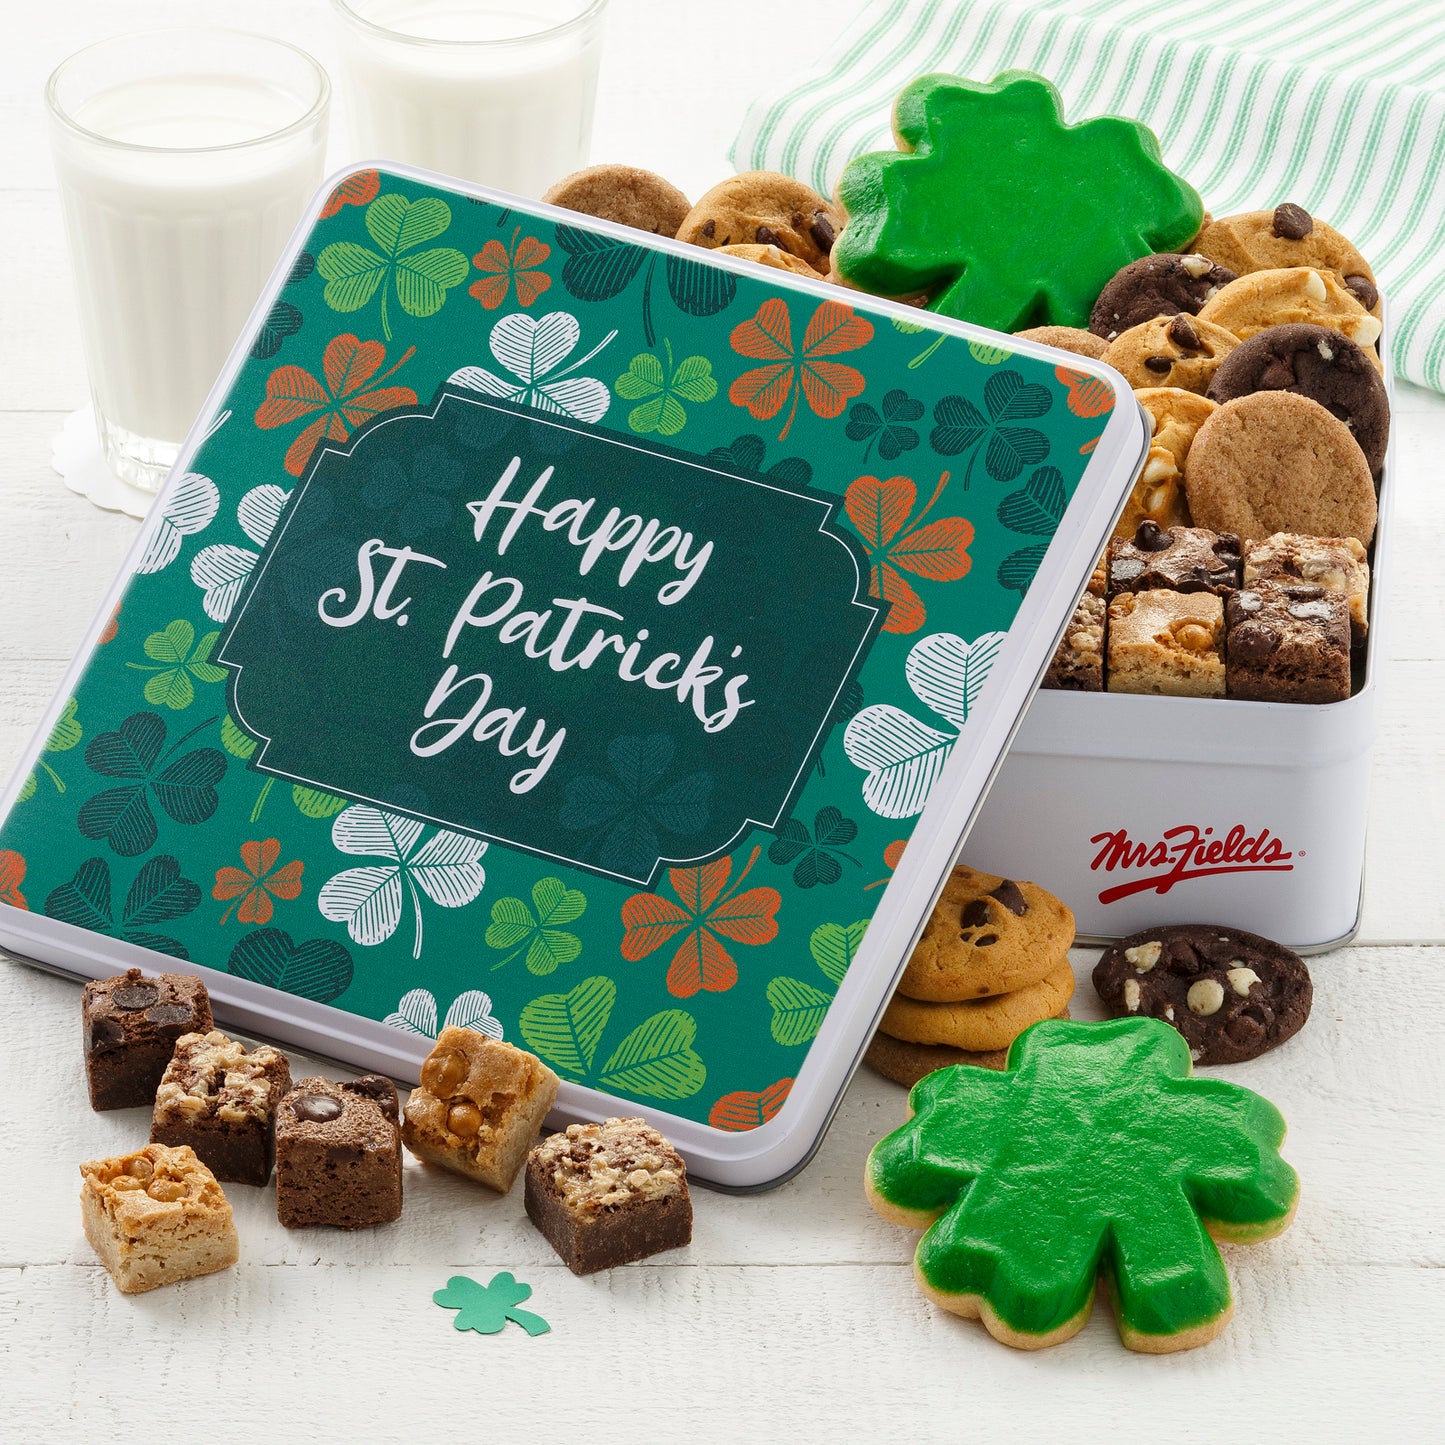 A Happy St. Patrick's Day gift tin decorated with clovers and filled with an assortment of nibblers, brownie bites, and two shamrock frosted cookies